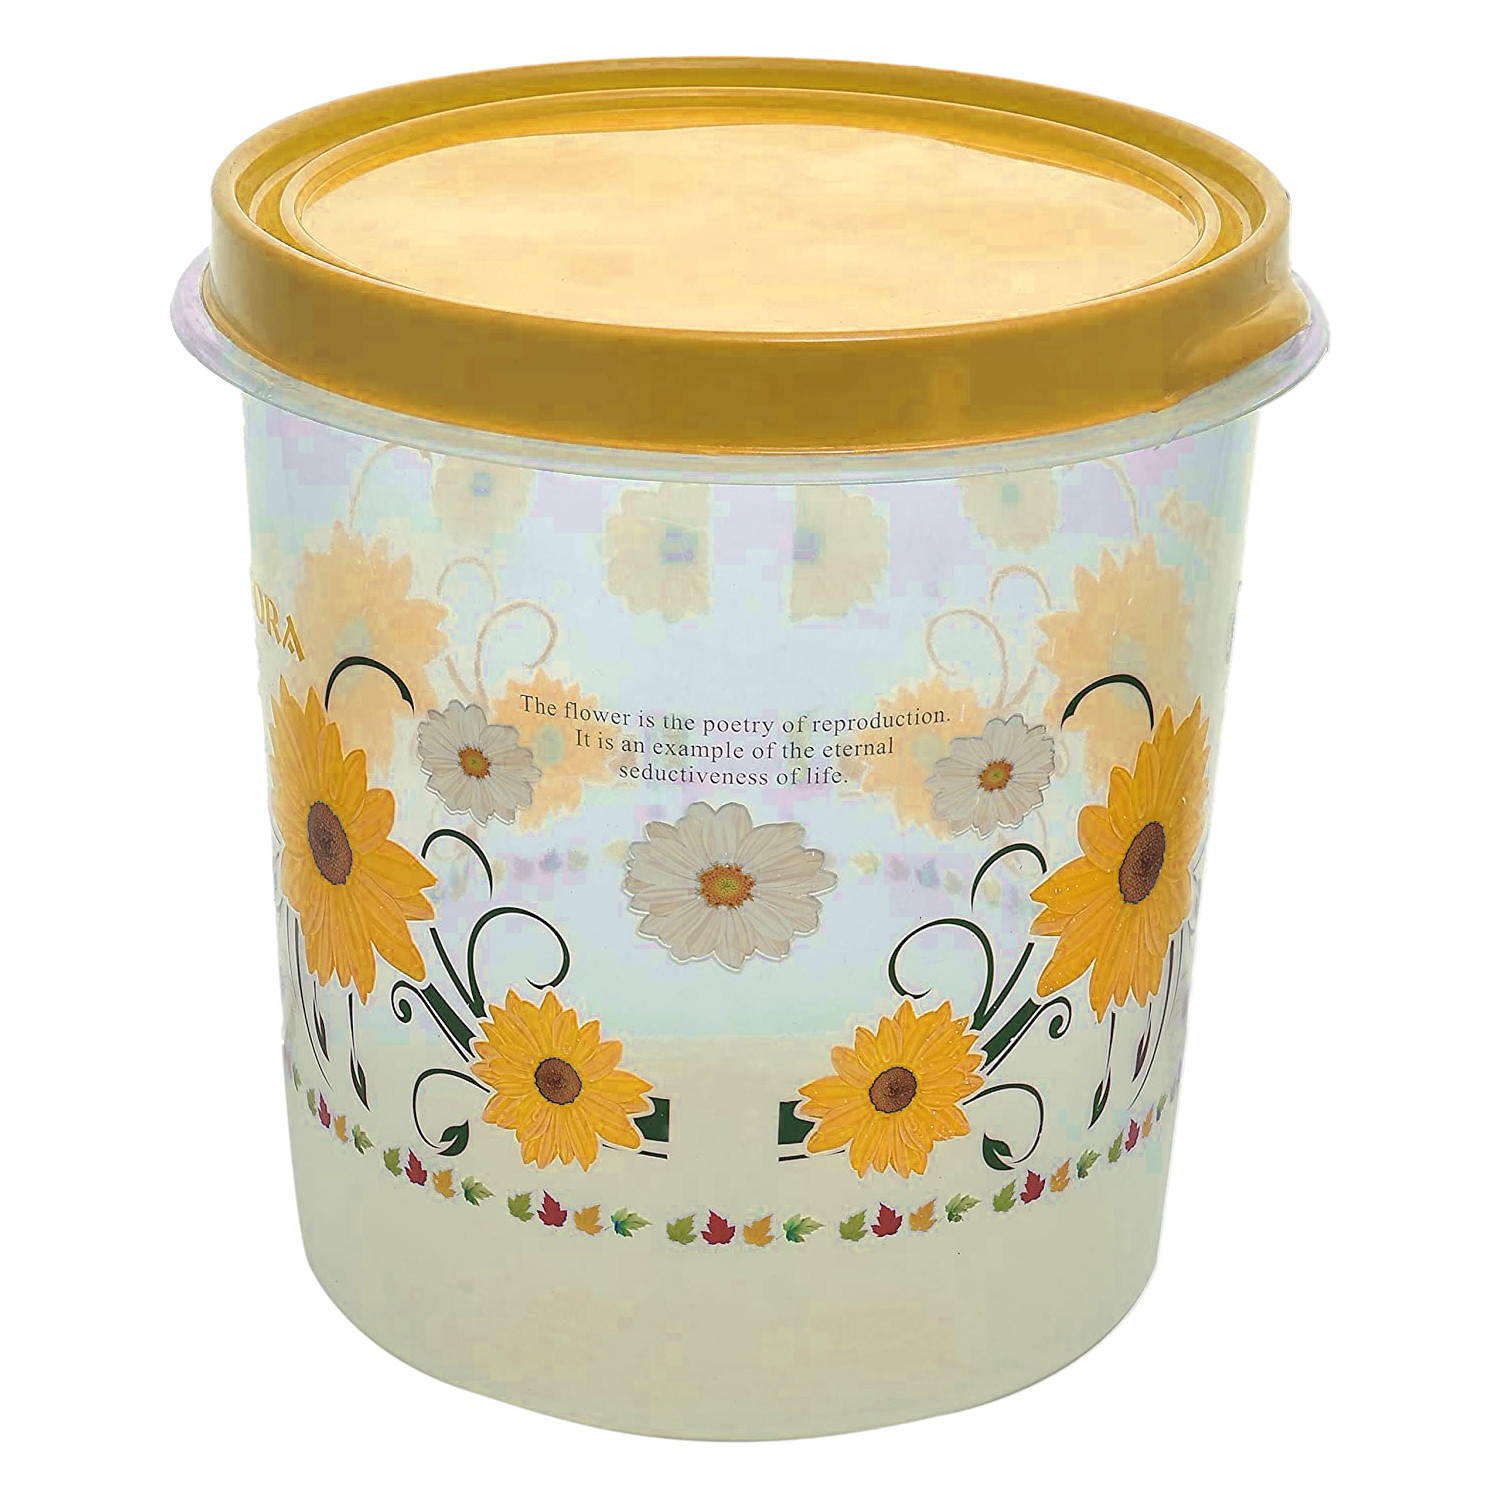 Kuber Industries Storage Container|Durable Plastic Floral Design BPA Free Food Kitchen Organizer With Lid|Food Utility Jar, 10 Ltr (Yellow)